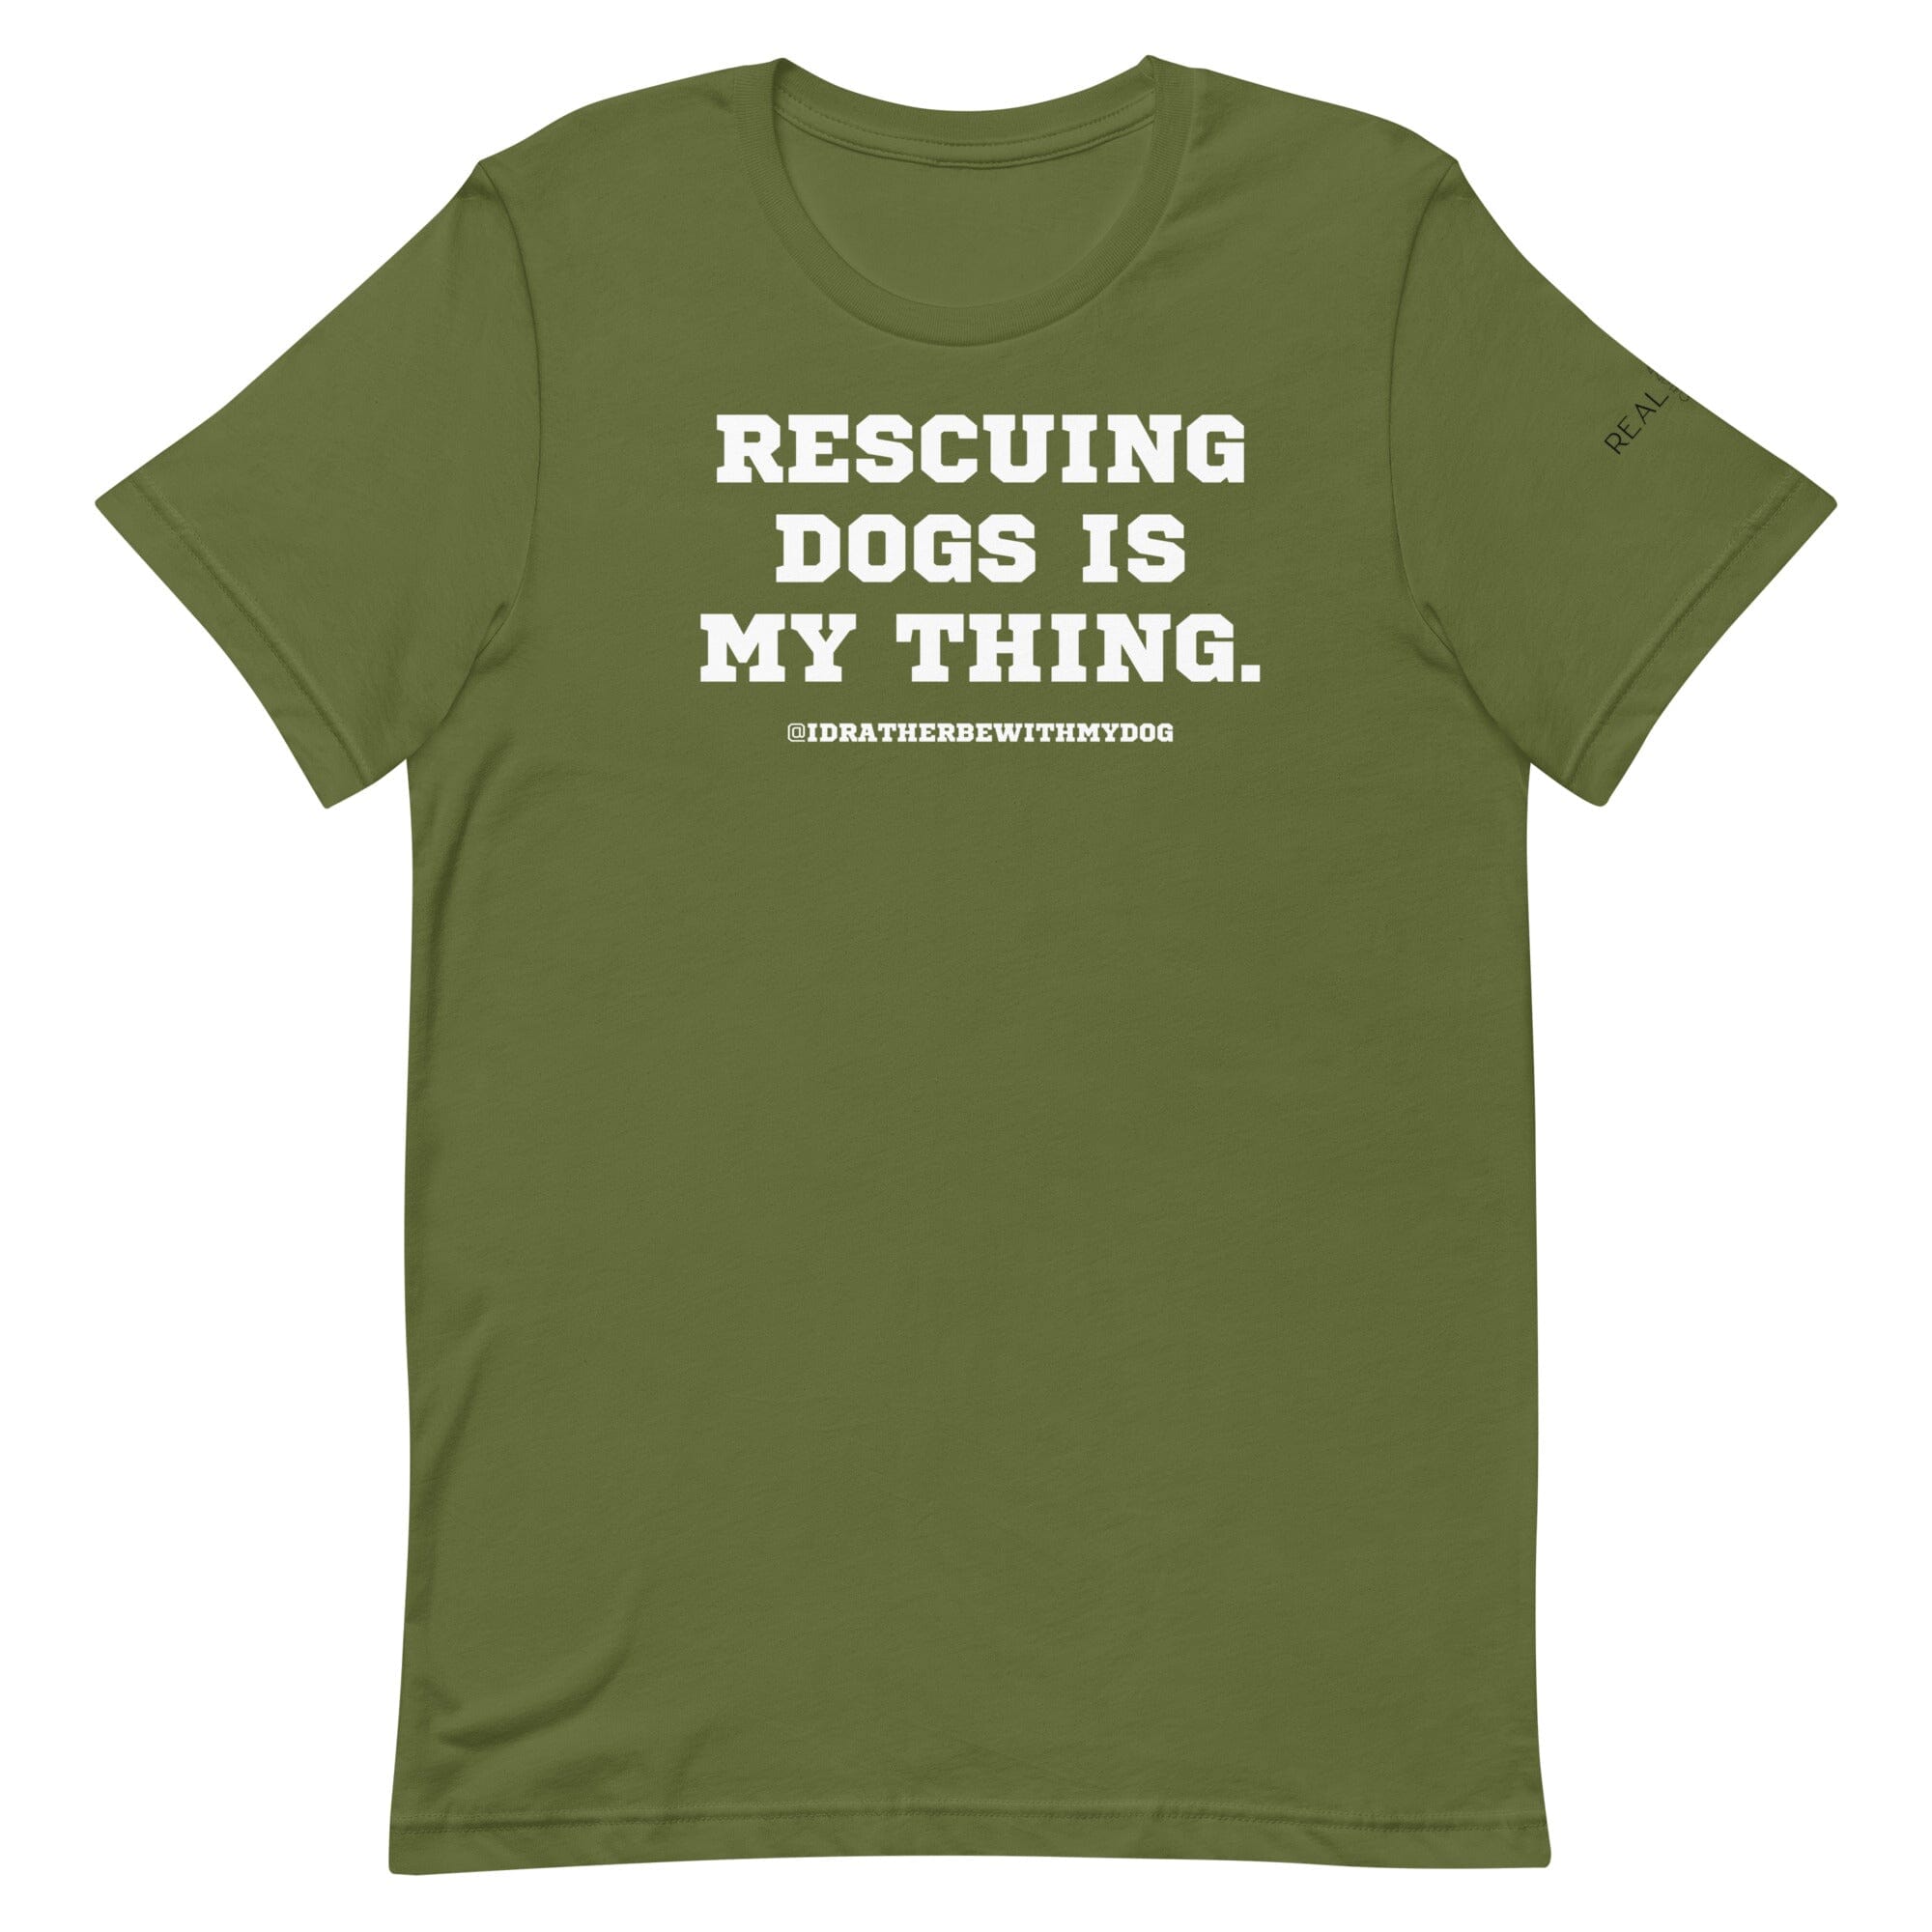 RESCUING DOGS IS MY THING UNI T (RGR)